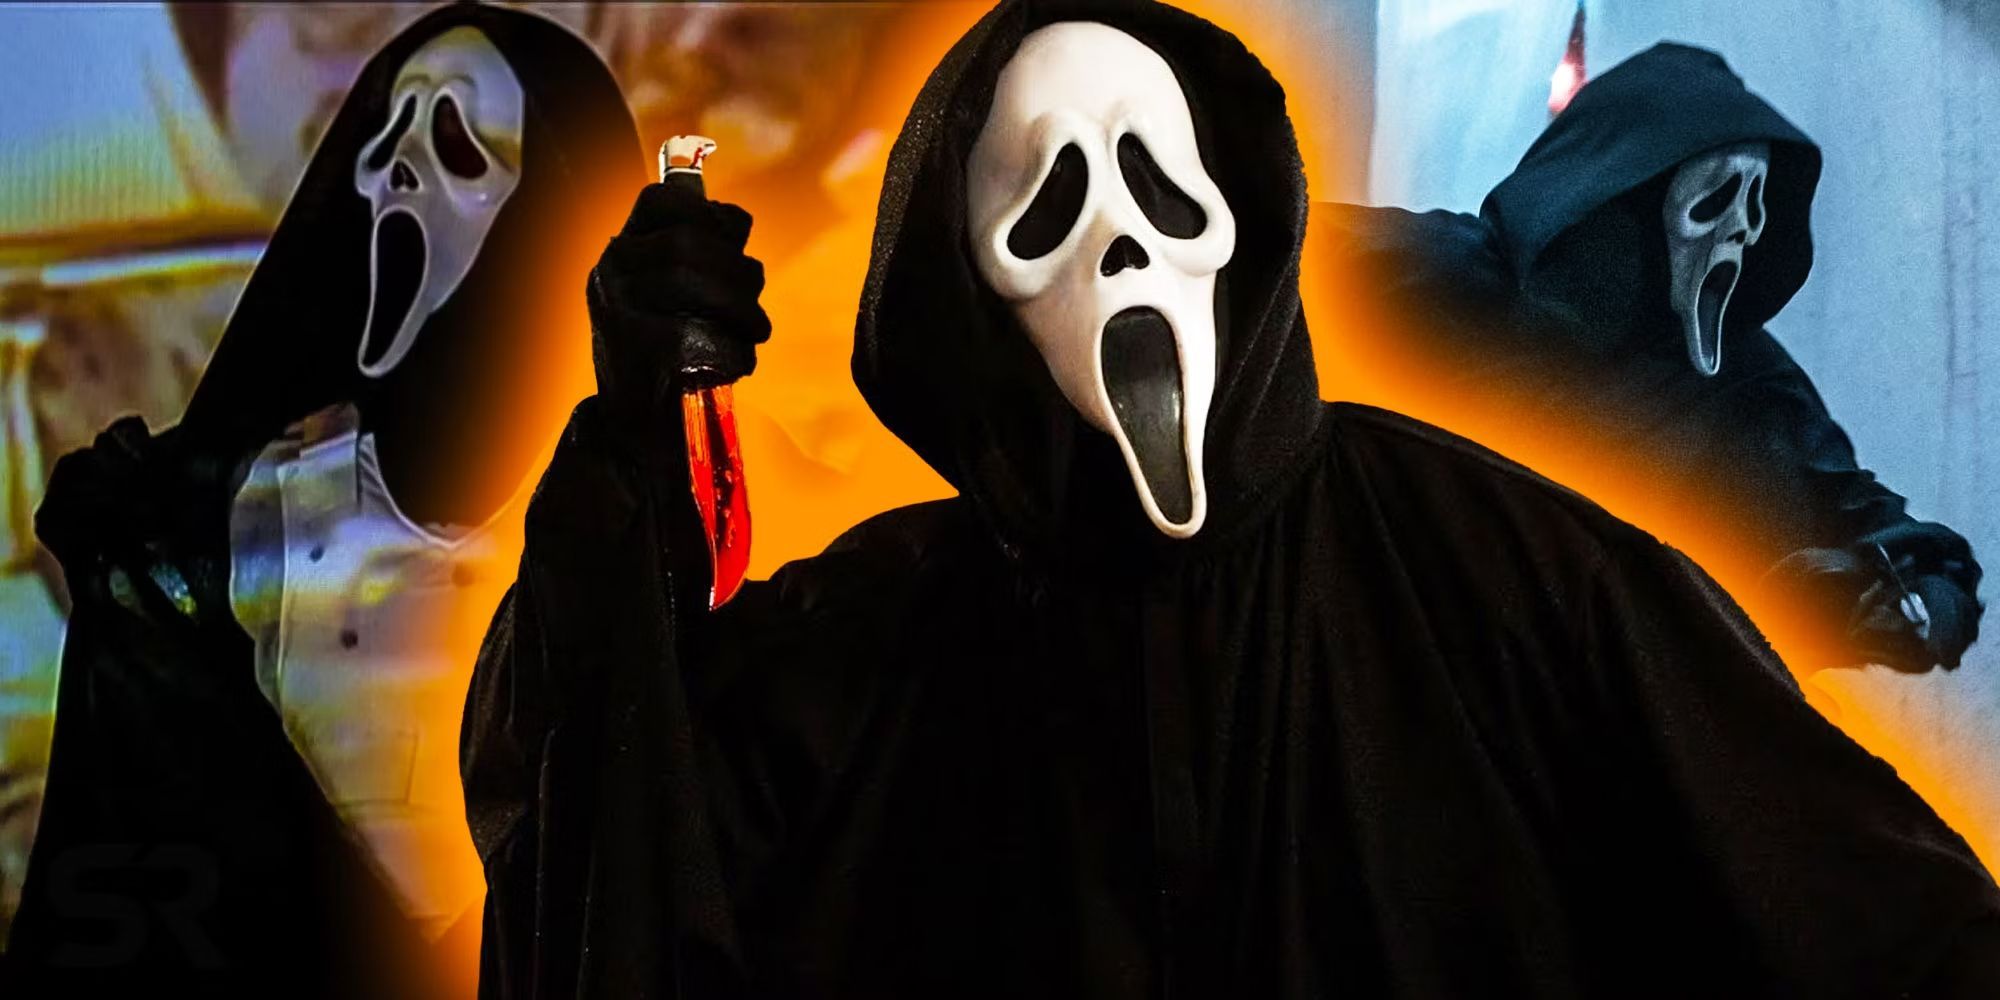 Three images of Ghostface from Scream